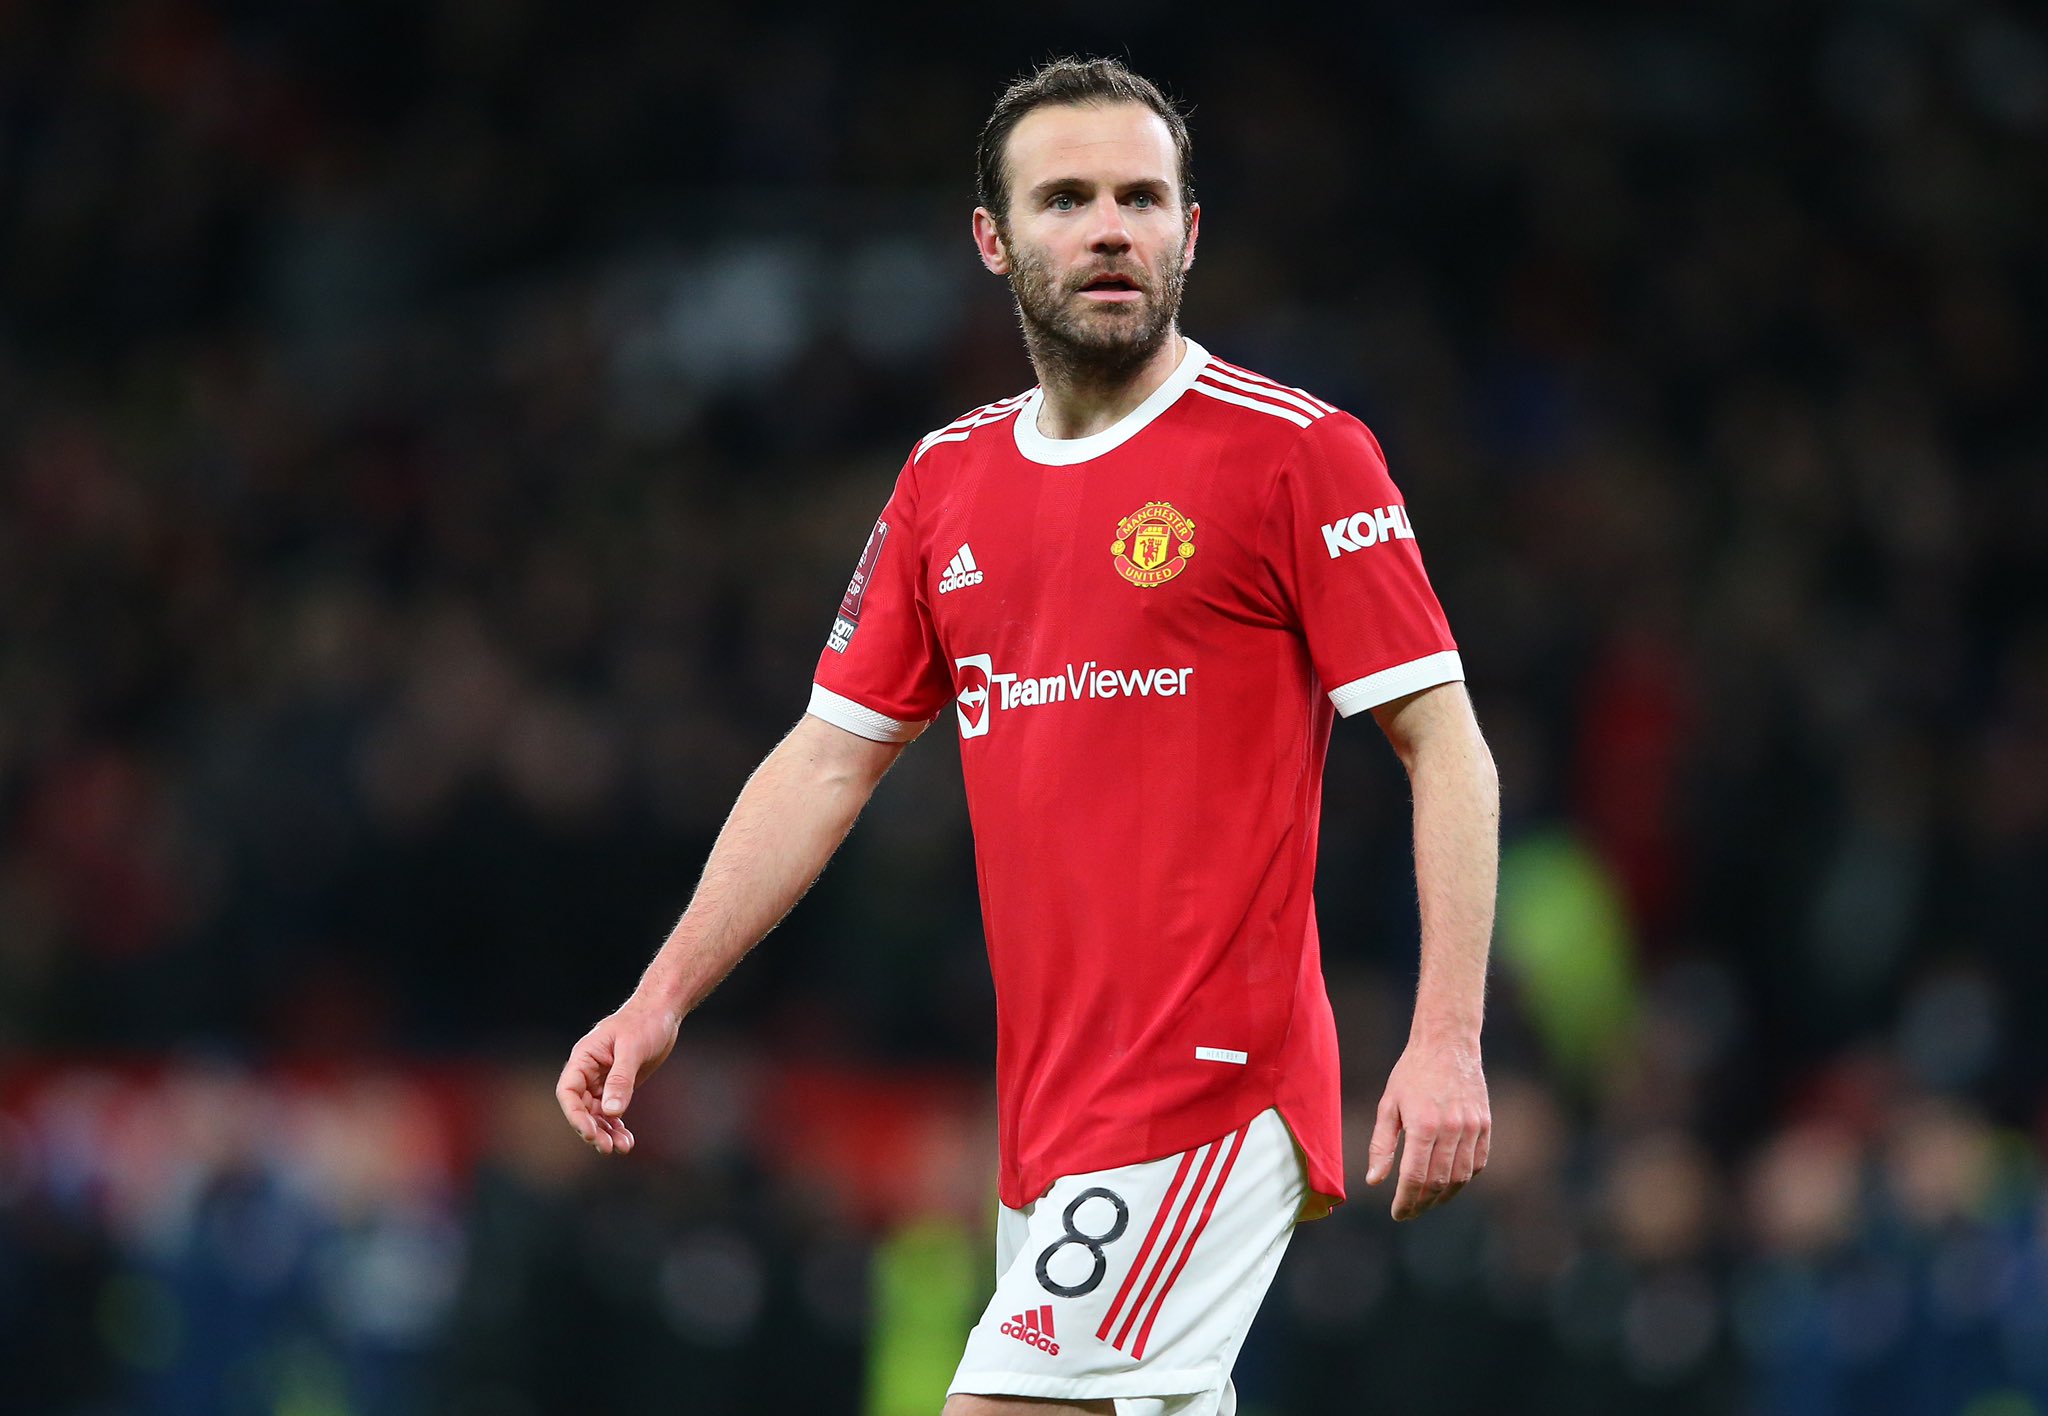 Haven’t been playing as much as I would like and I really miss it, claims Juan Mata